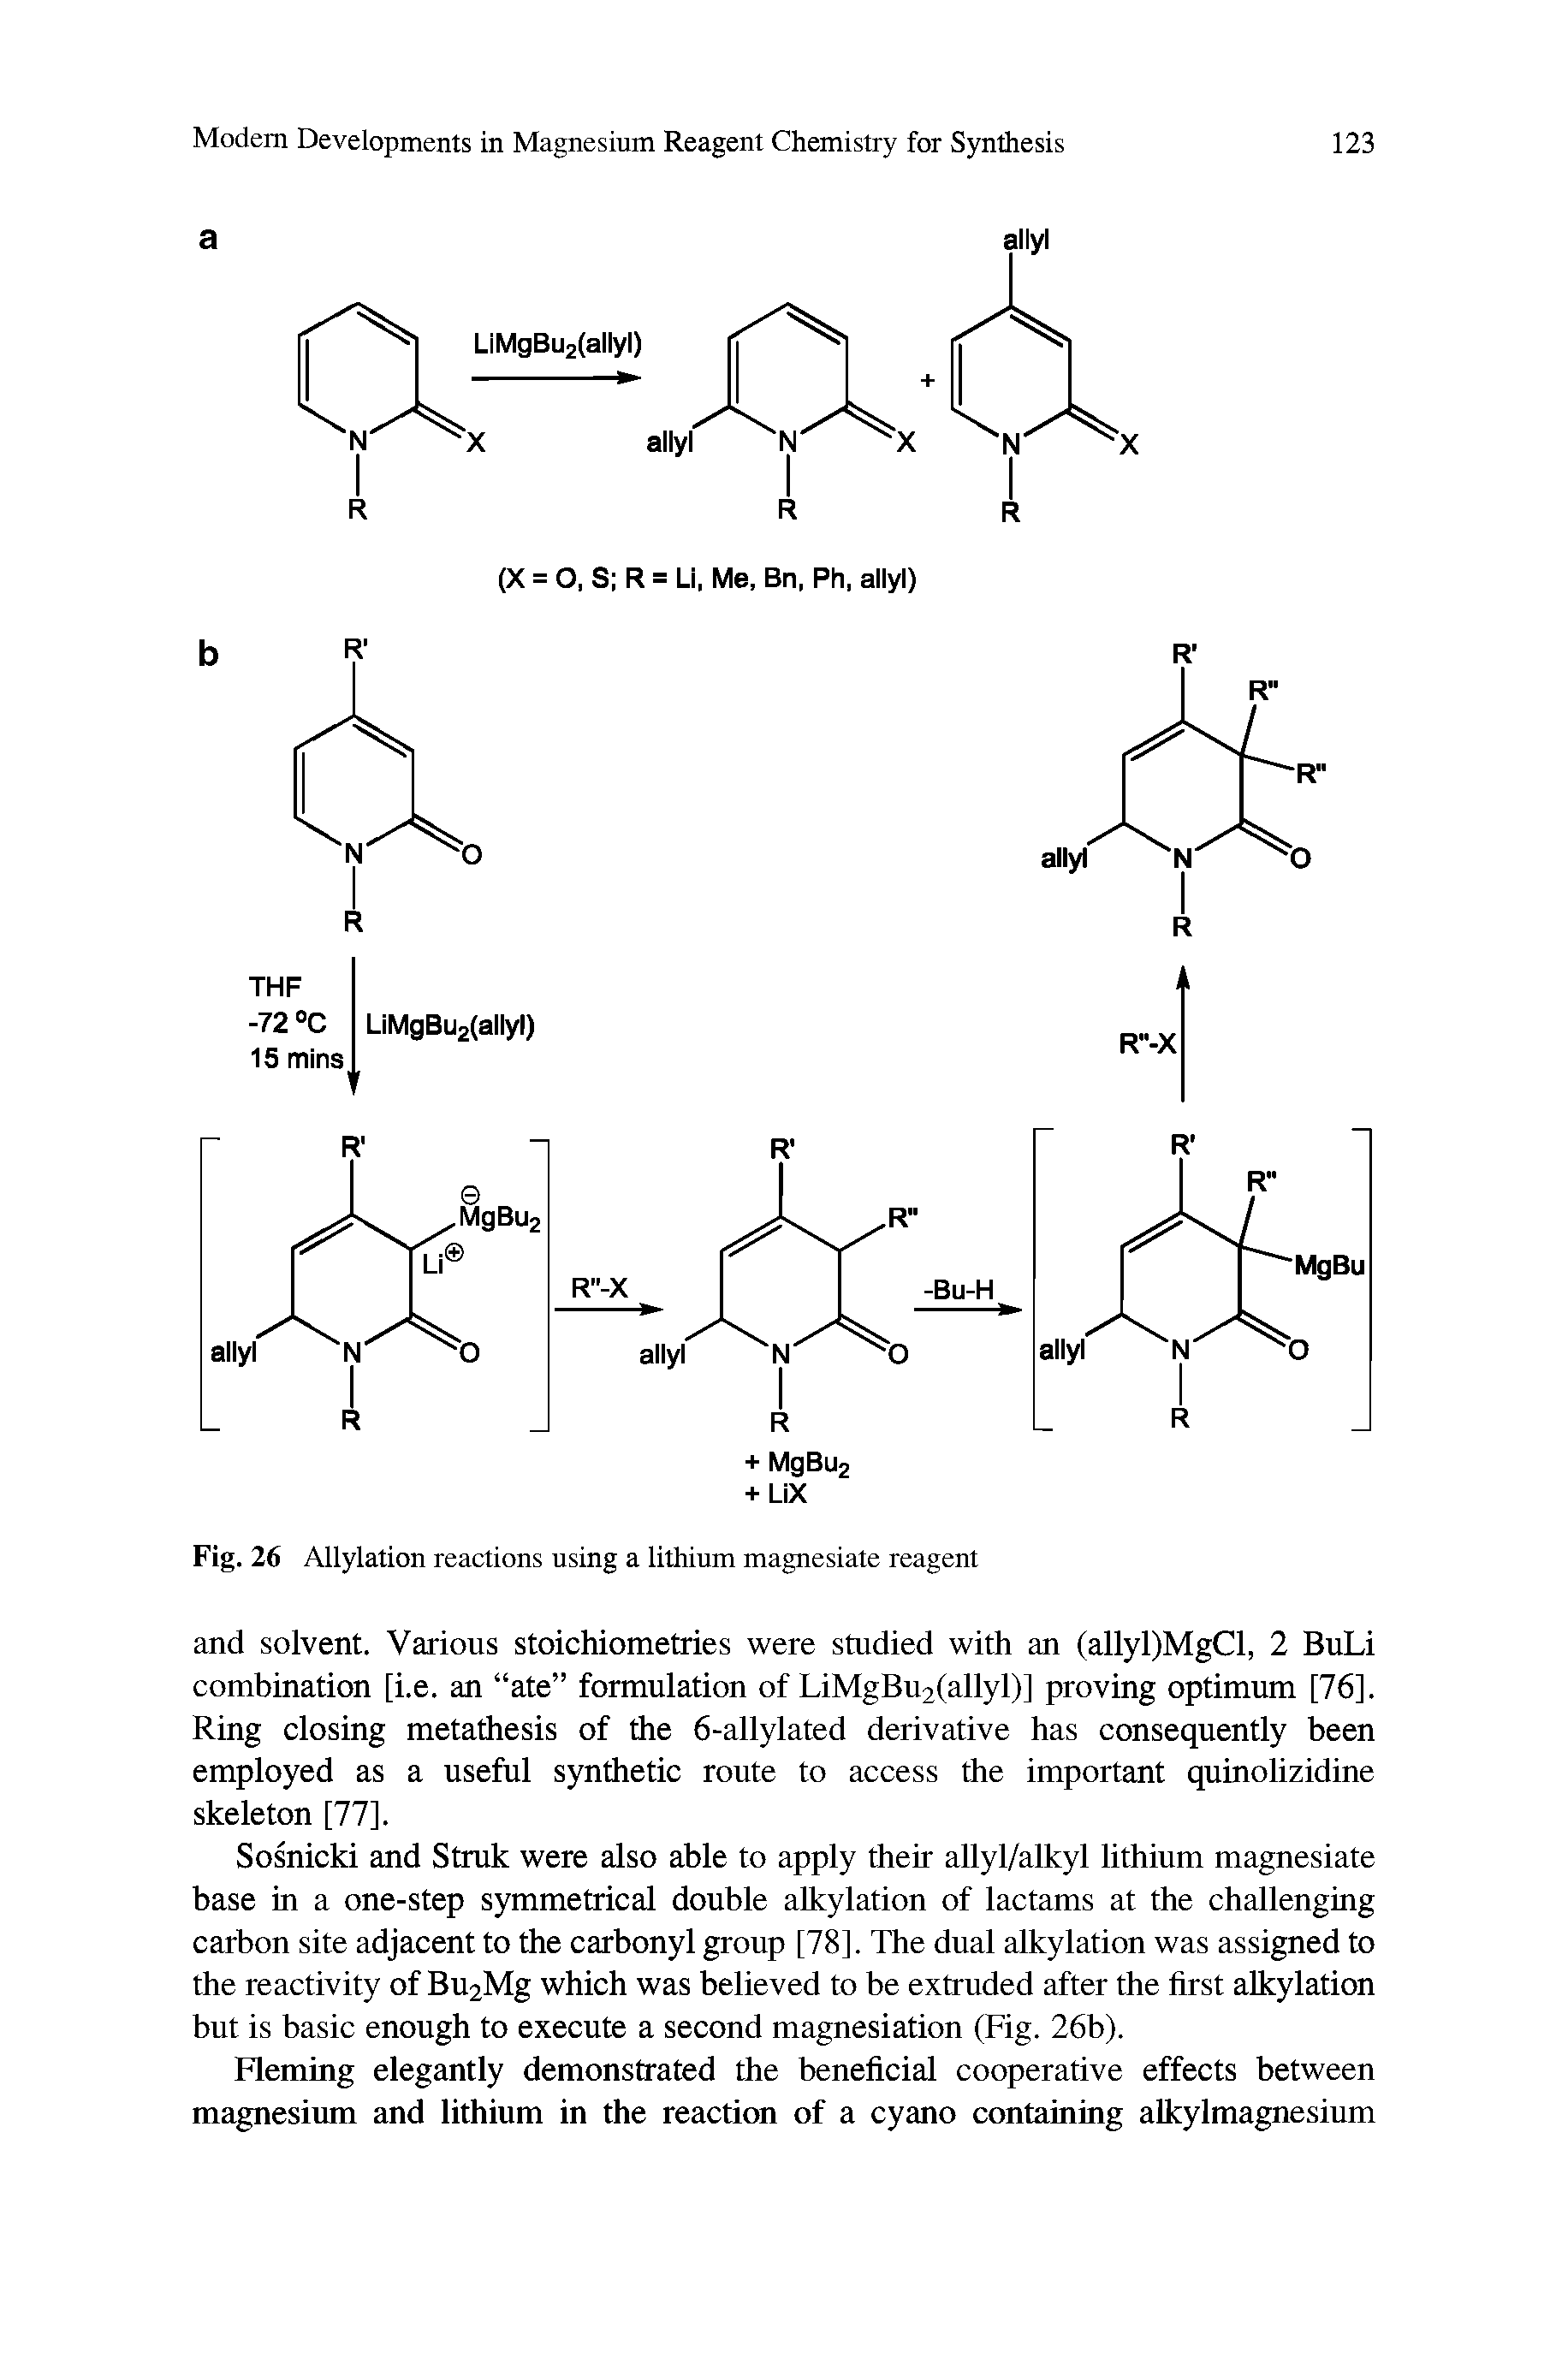 Fig. 26 Allylation reactions using a lithium magnesiate reagent...